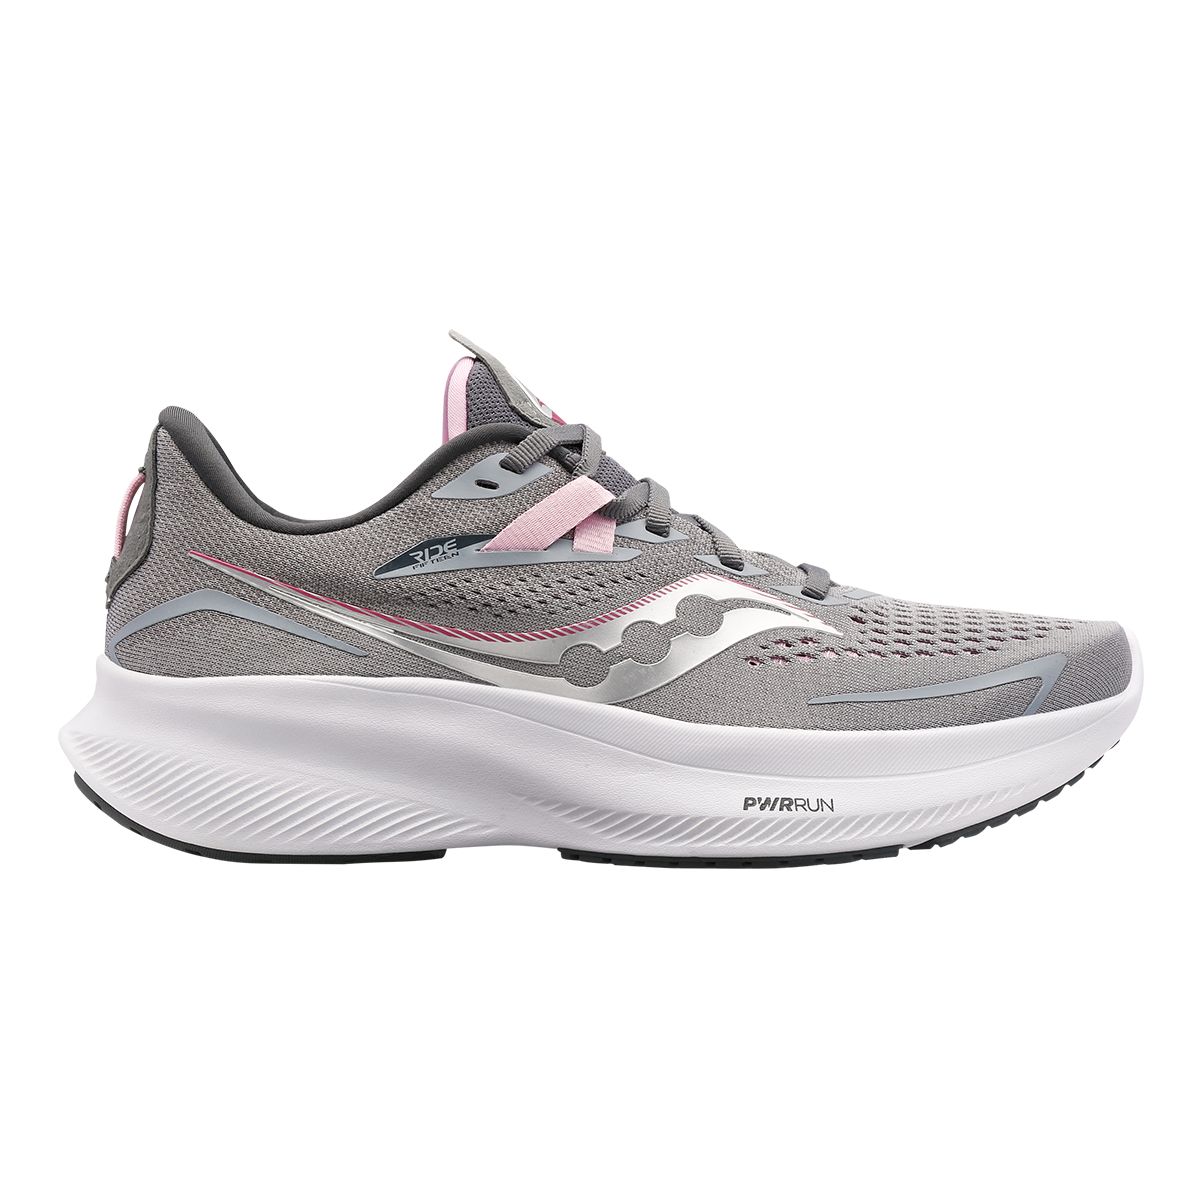 Saucony Women's Ride 15 Running Shoes, Cushioned, Knit